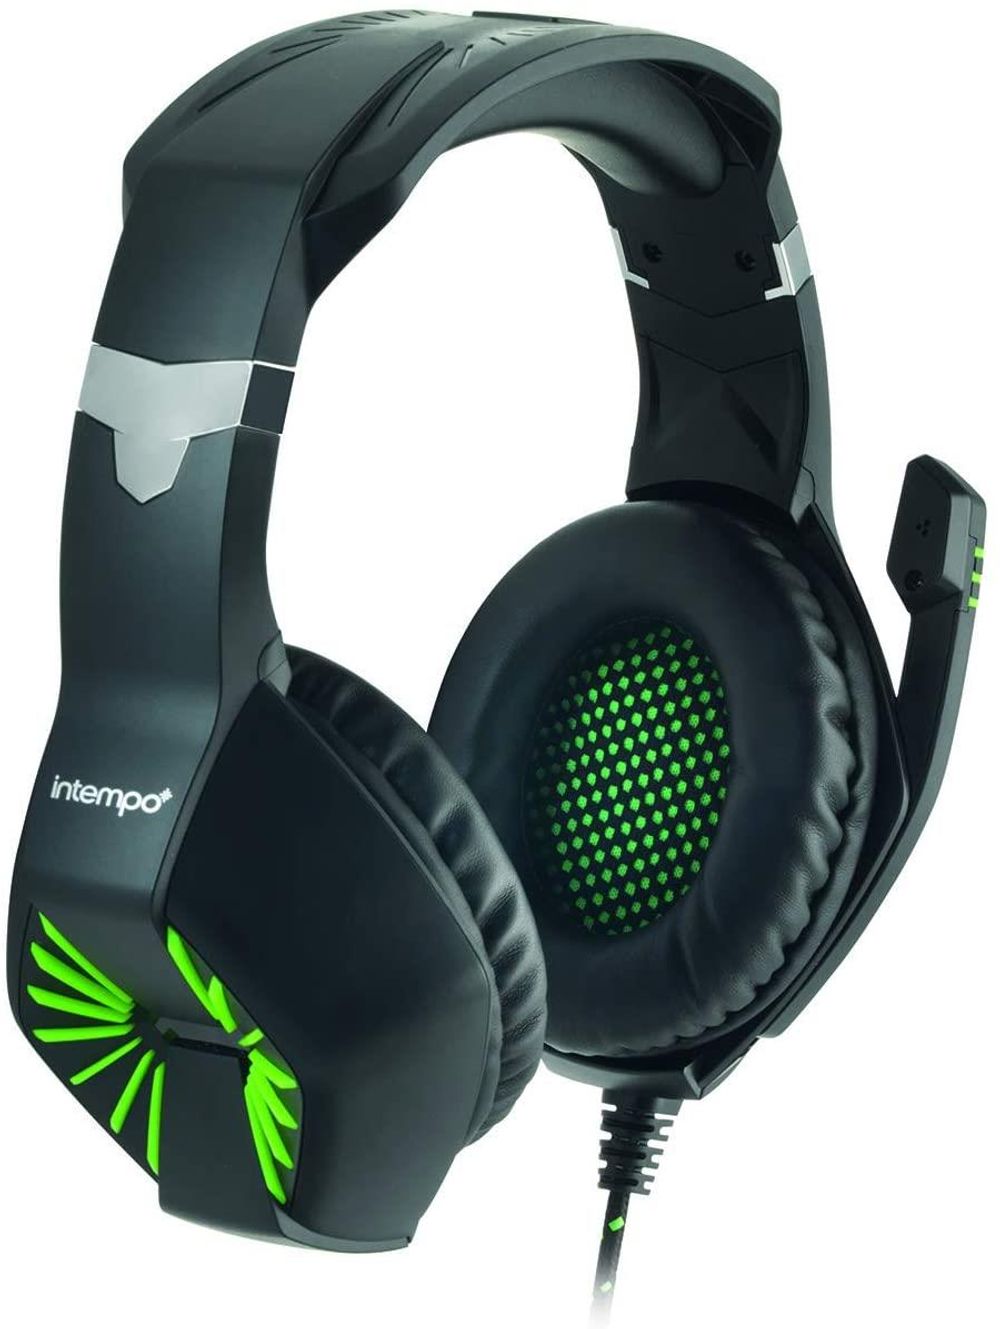 Intempo Quest WS18 Gaming Headset